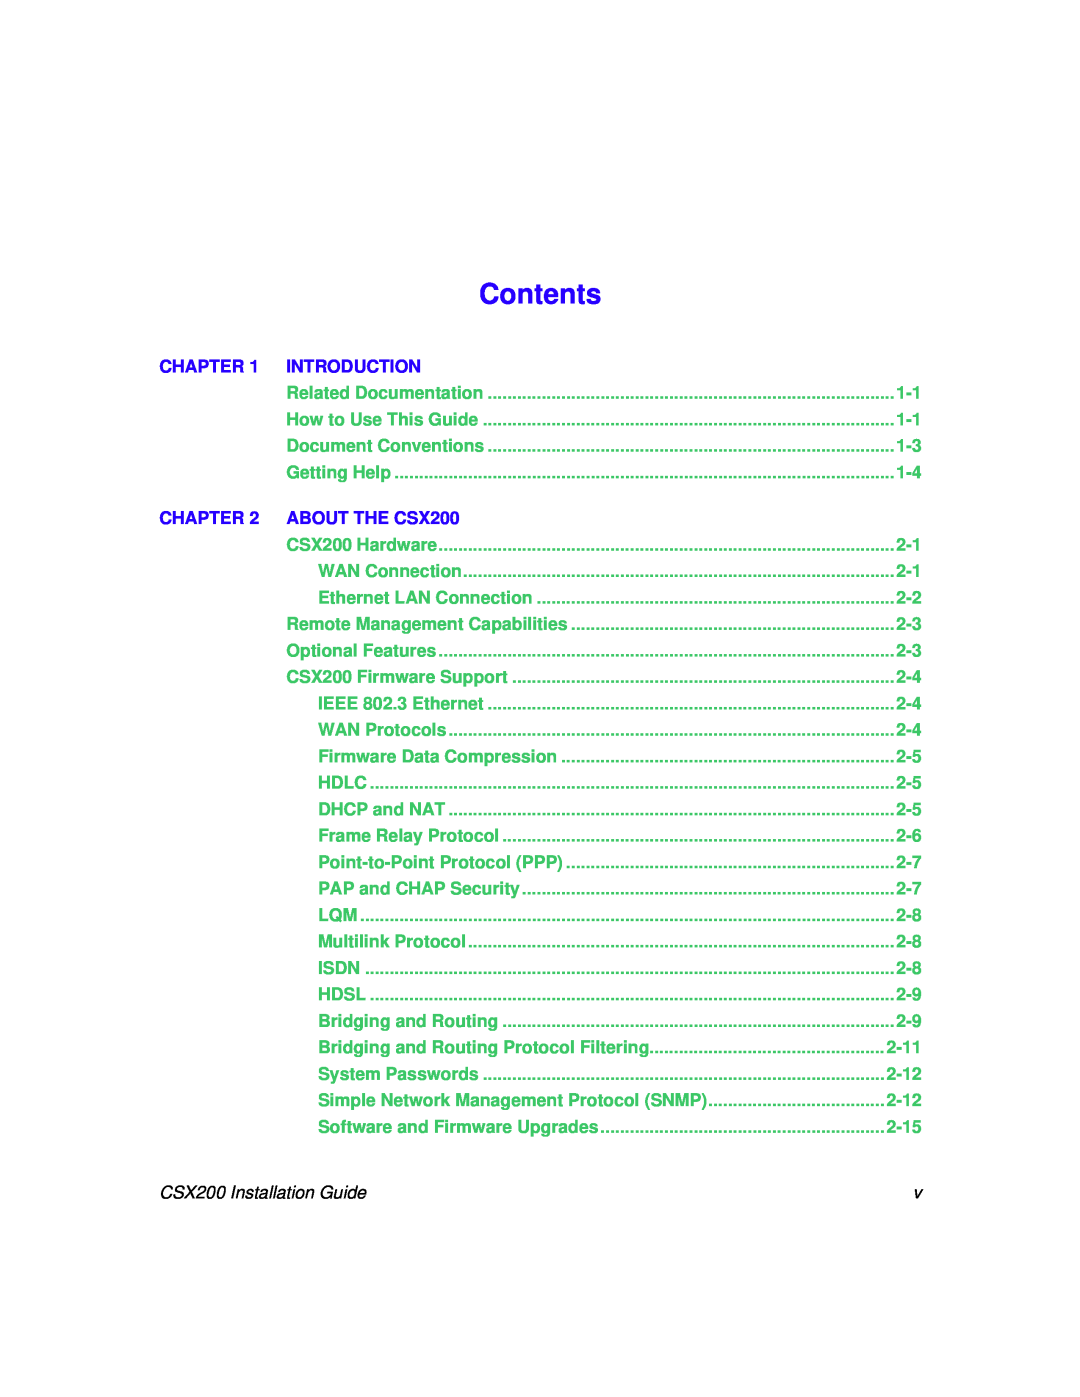 Cabletron Systems manual Contents, Introduction, ABOUT THE CSX200, CSX200 Installation Guide 